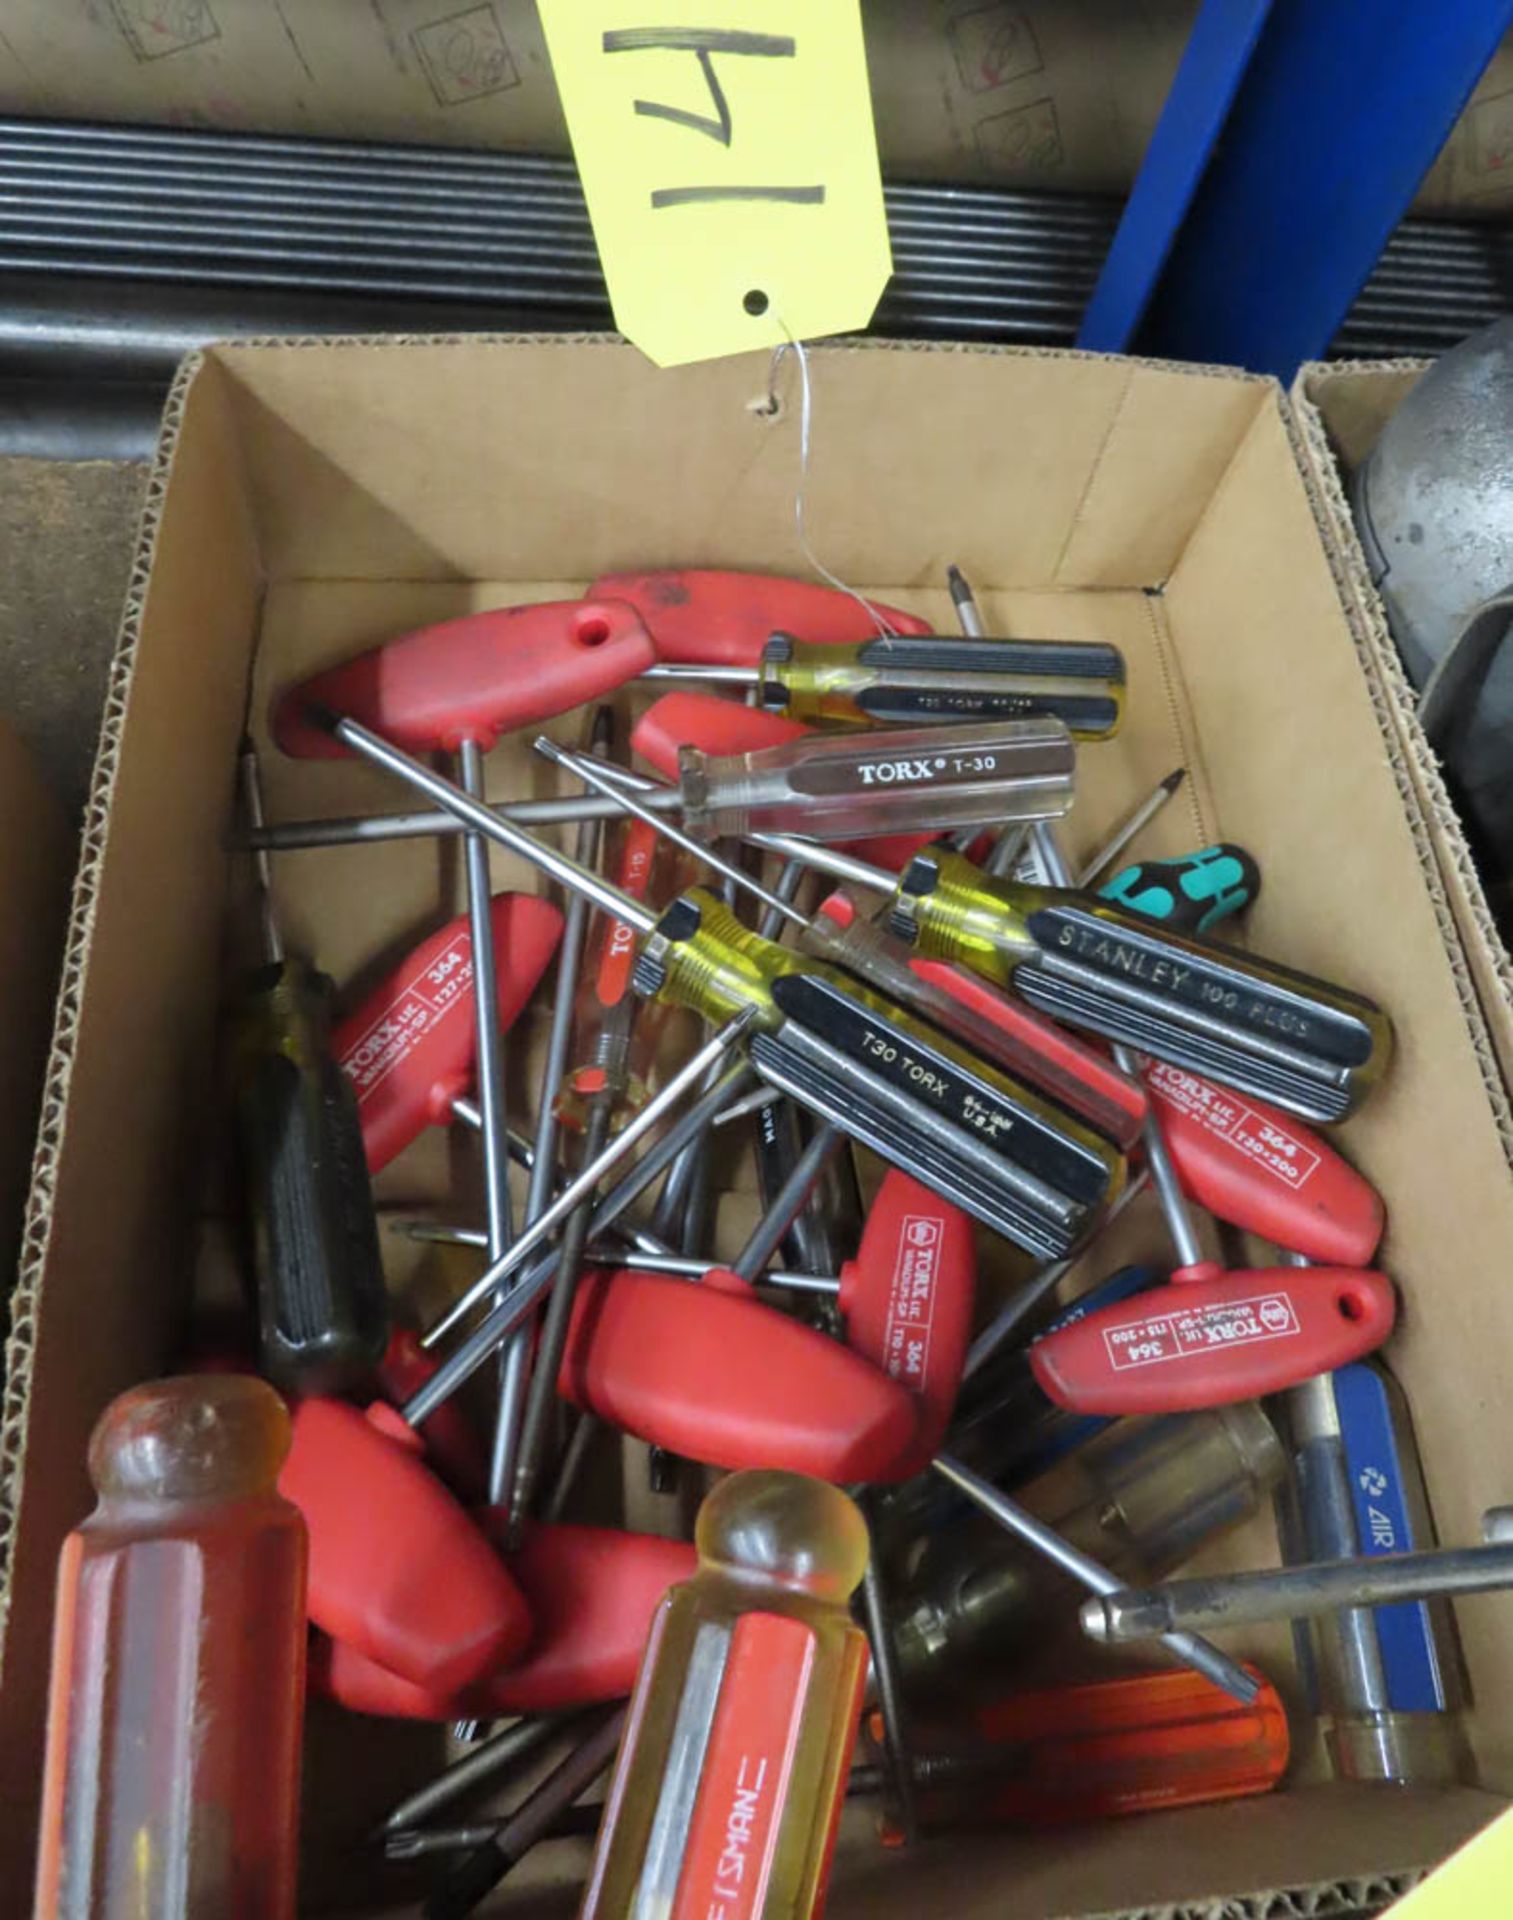 TORQUE WRENCHES